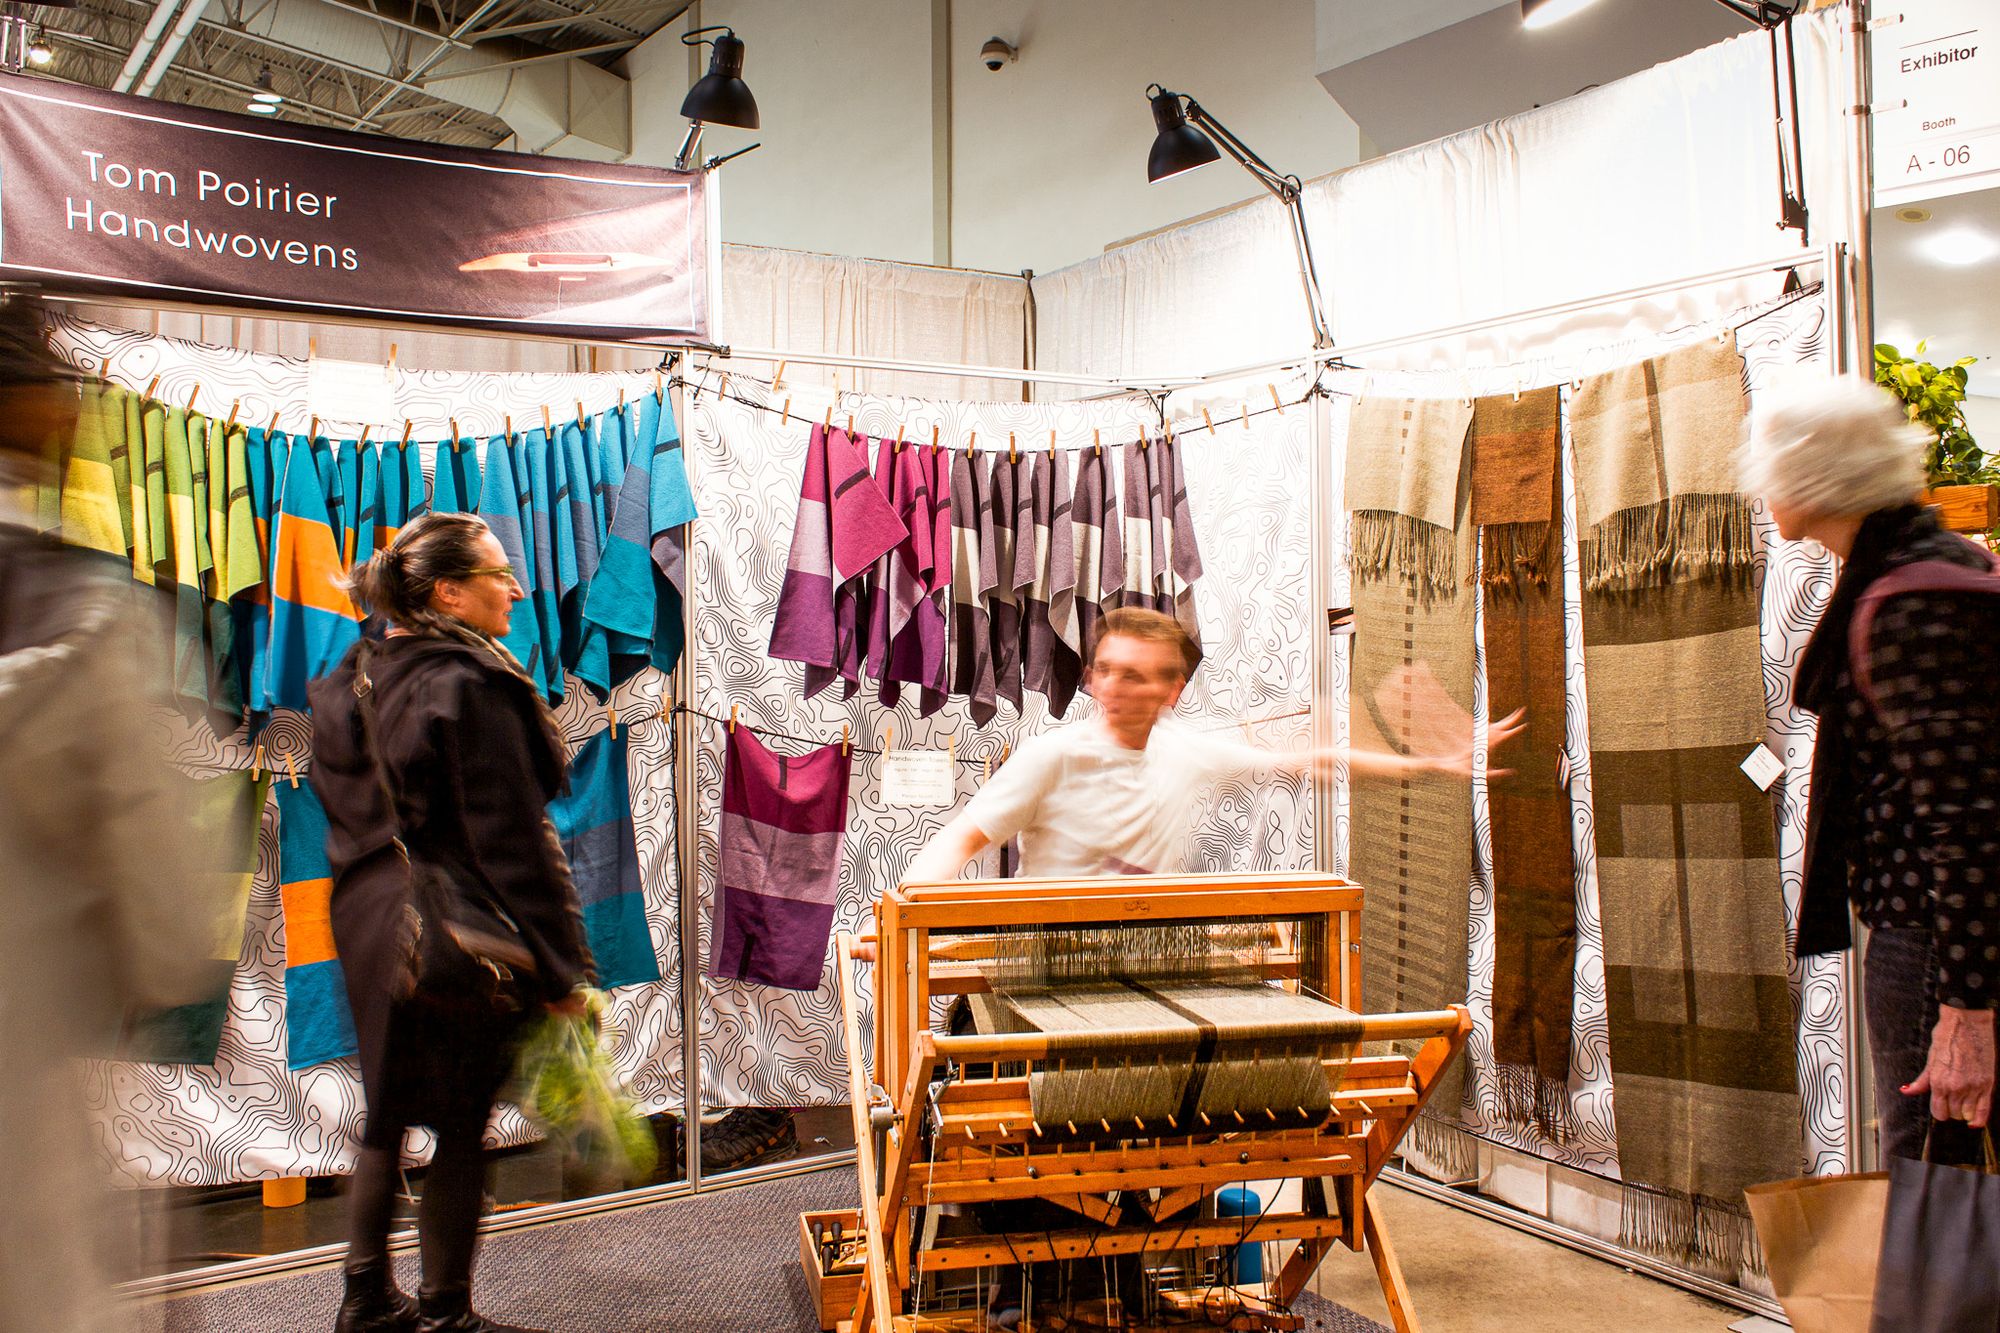 7 Show Booths That Caught Our Eye at OOAK, Plus 5 Award-Winning Designs